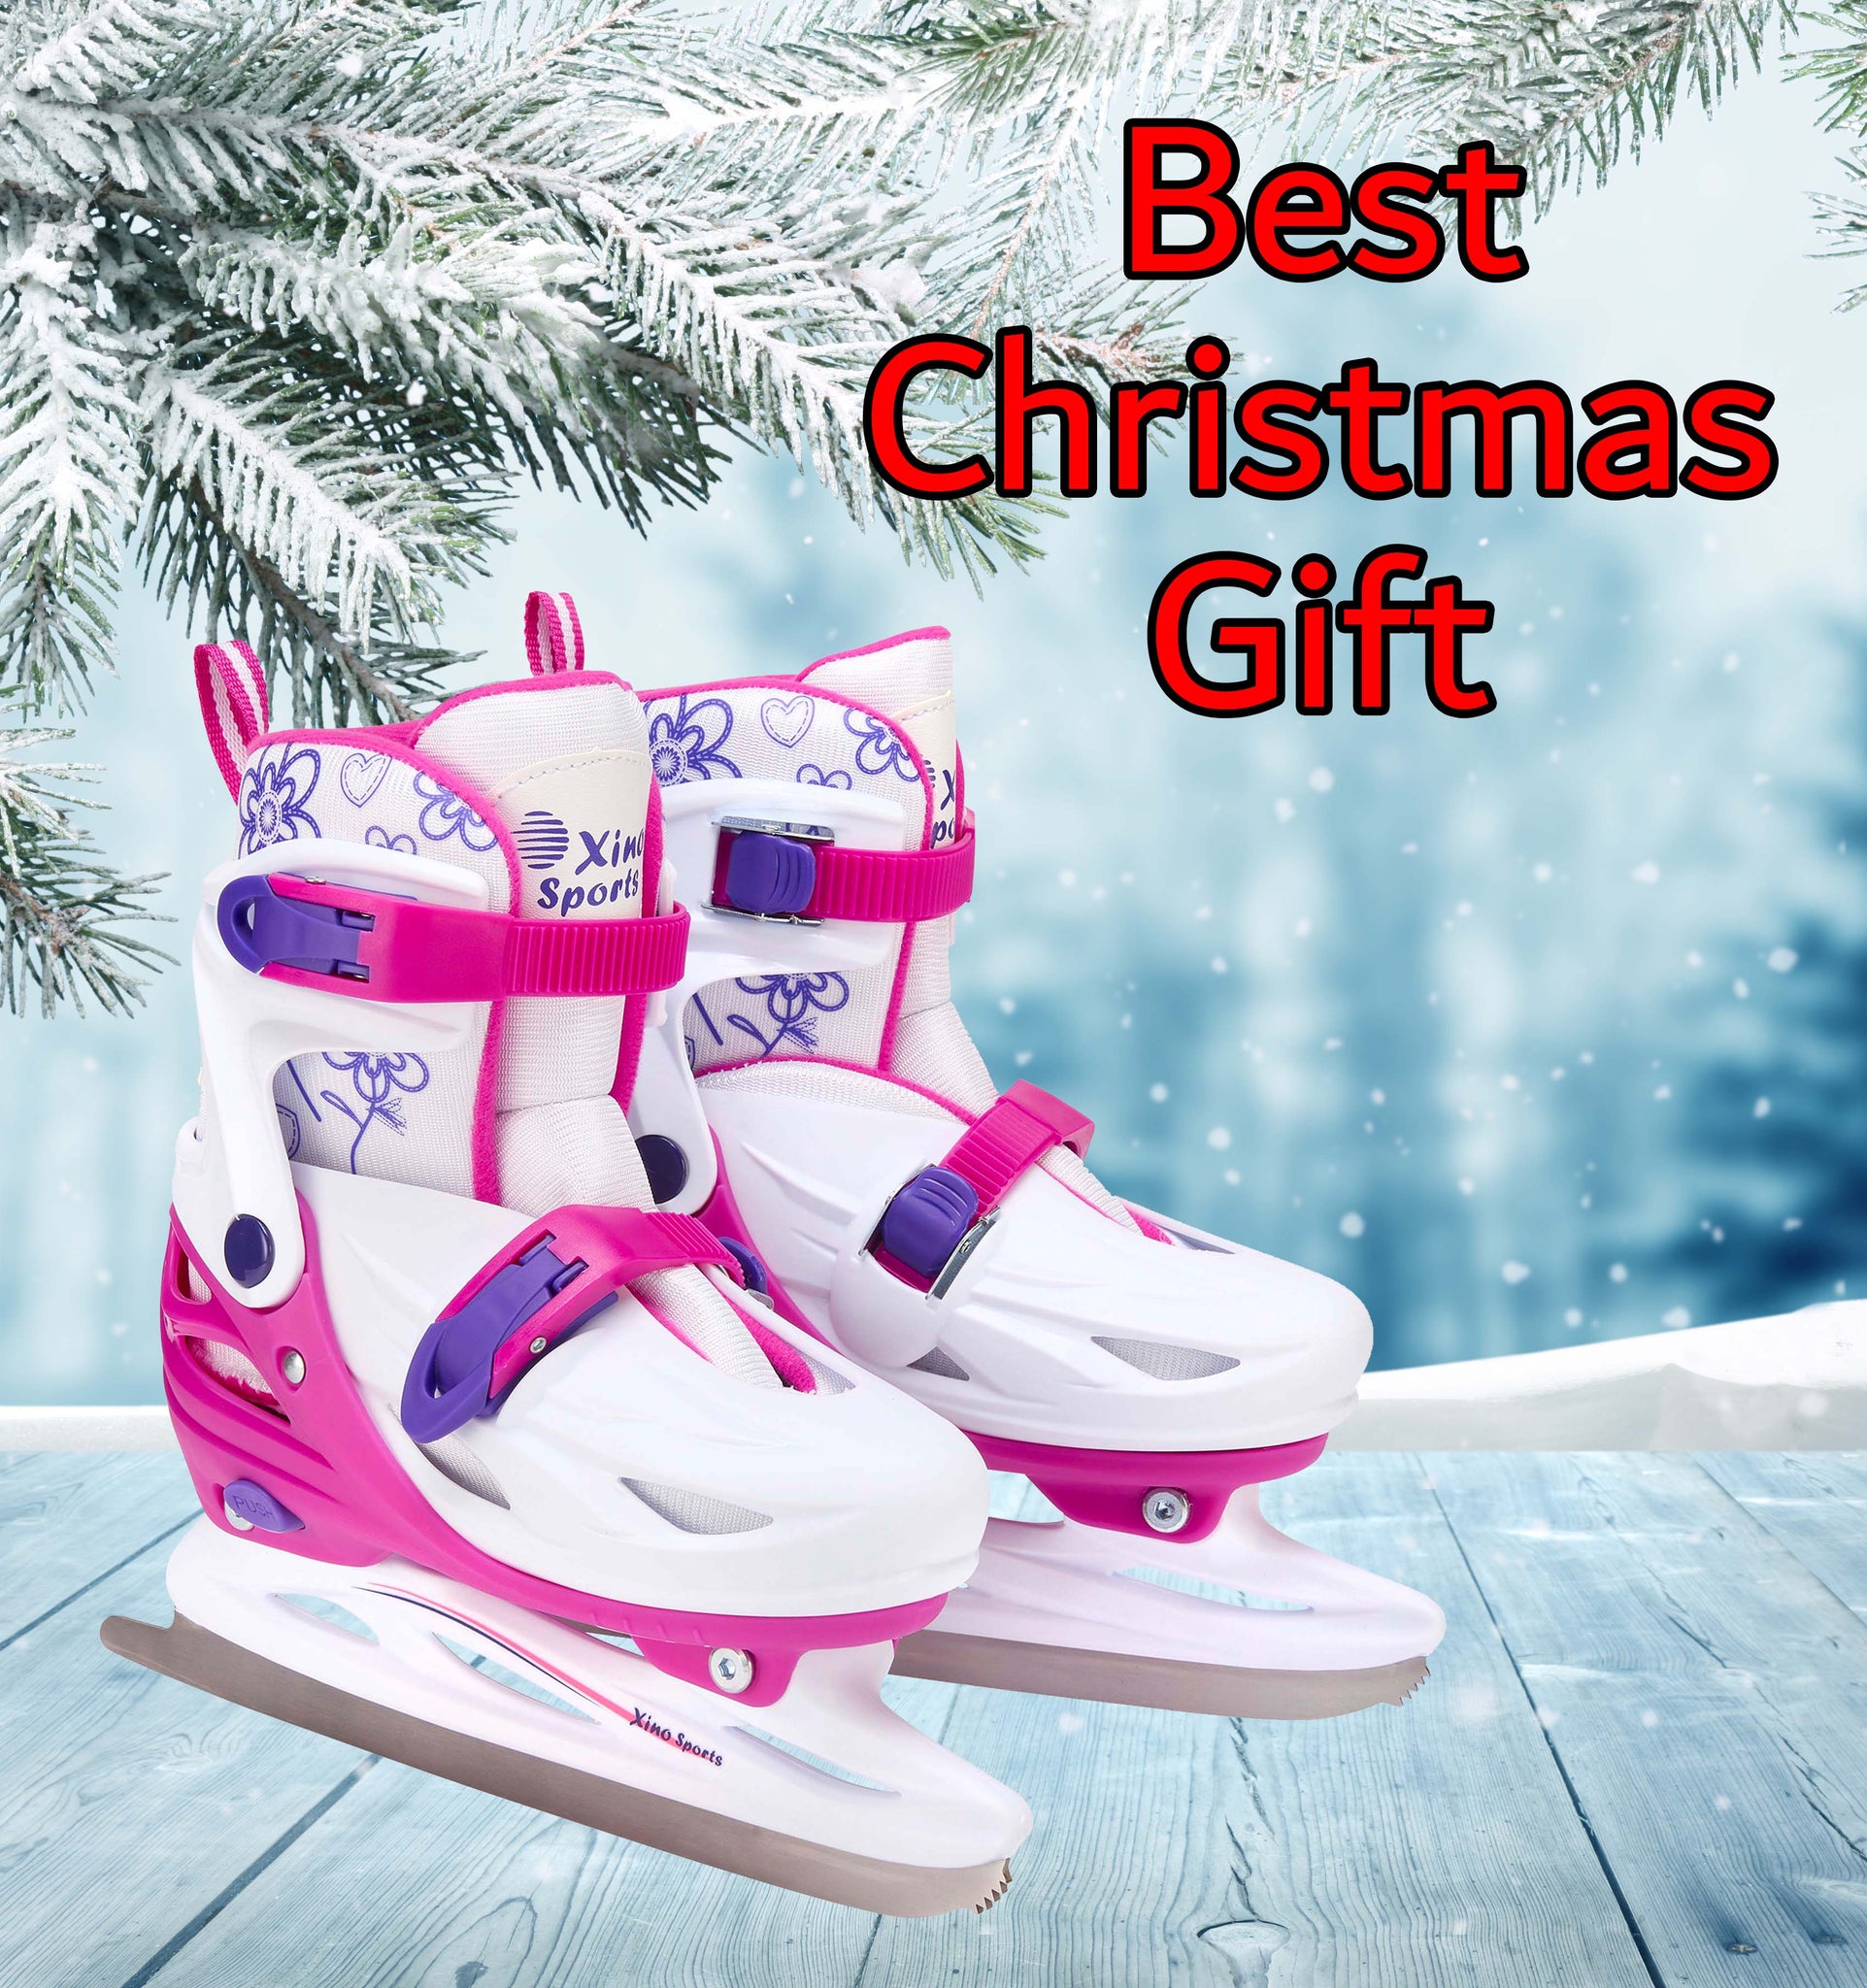 Girls Ice Skates | Adjustable | Reinforced Ankle Support - Xino Sports